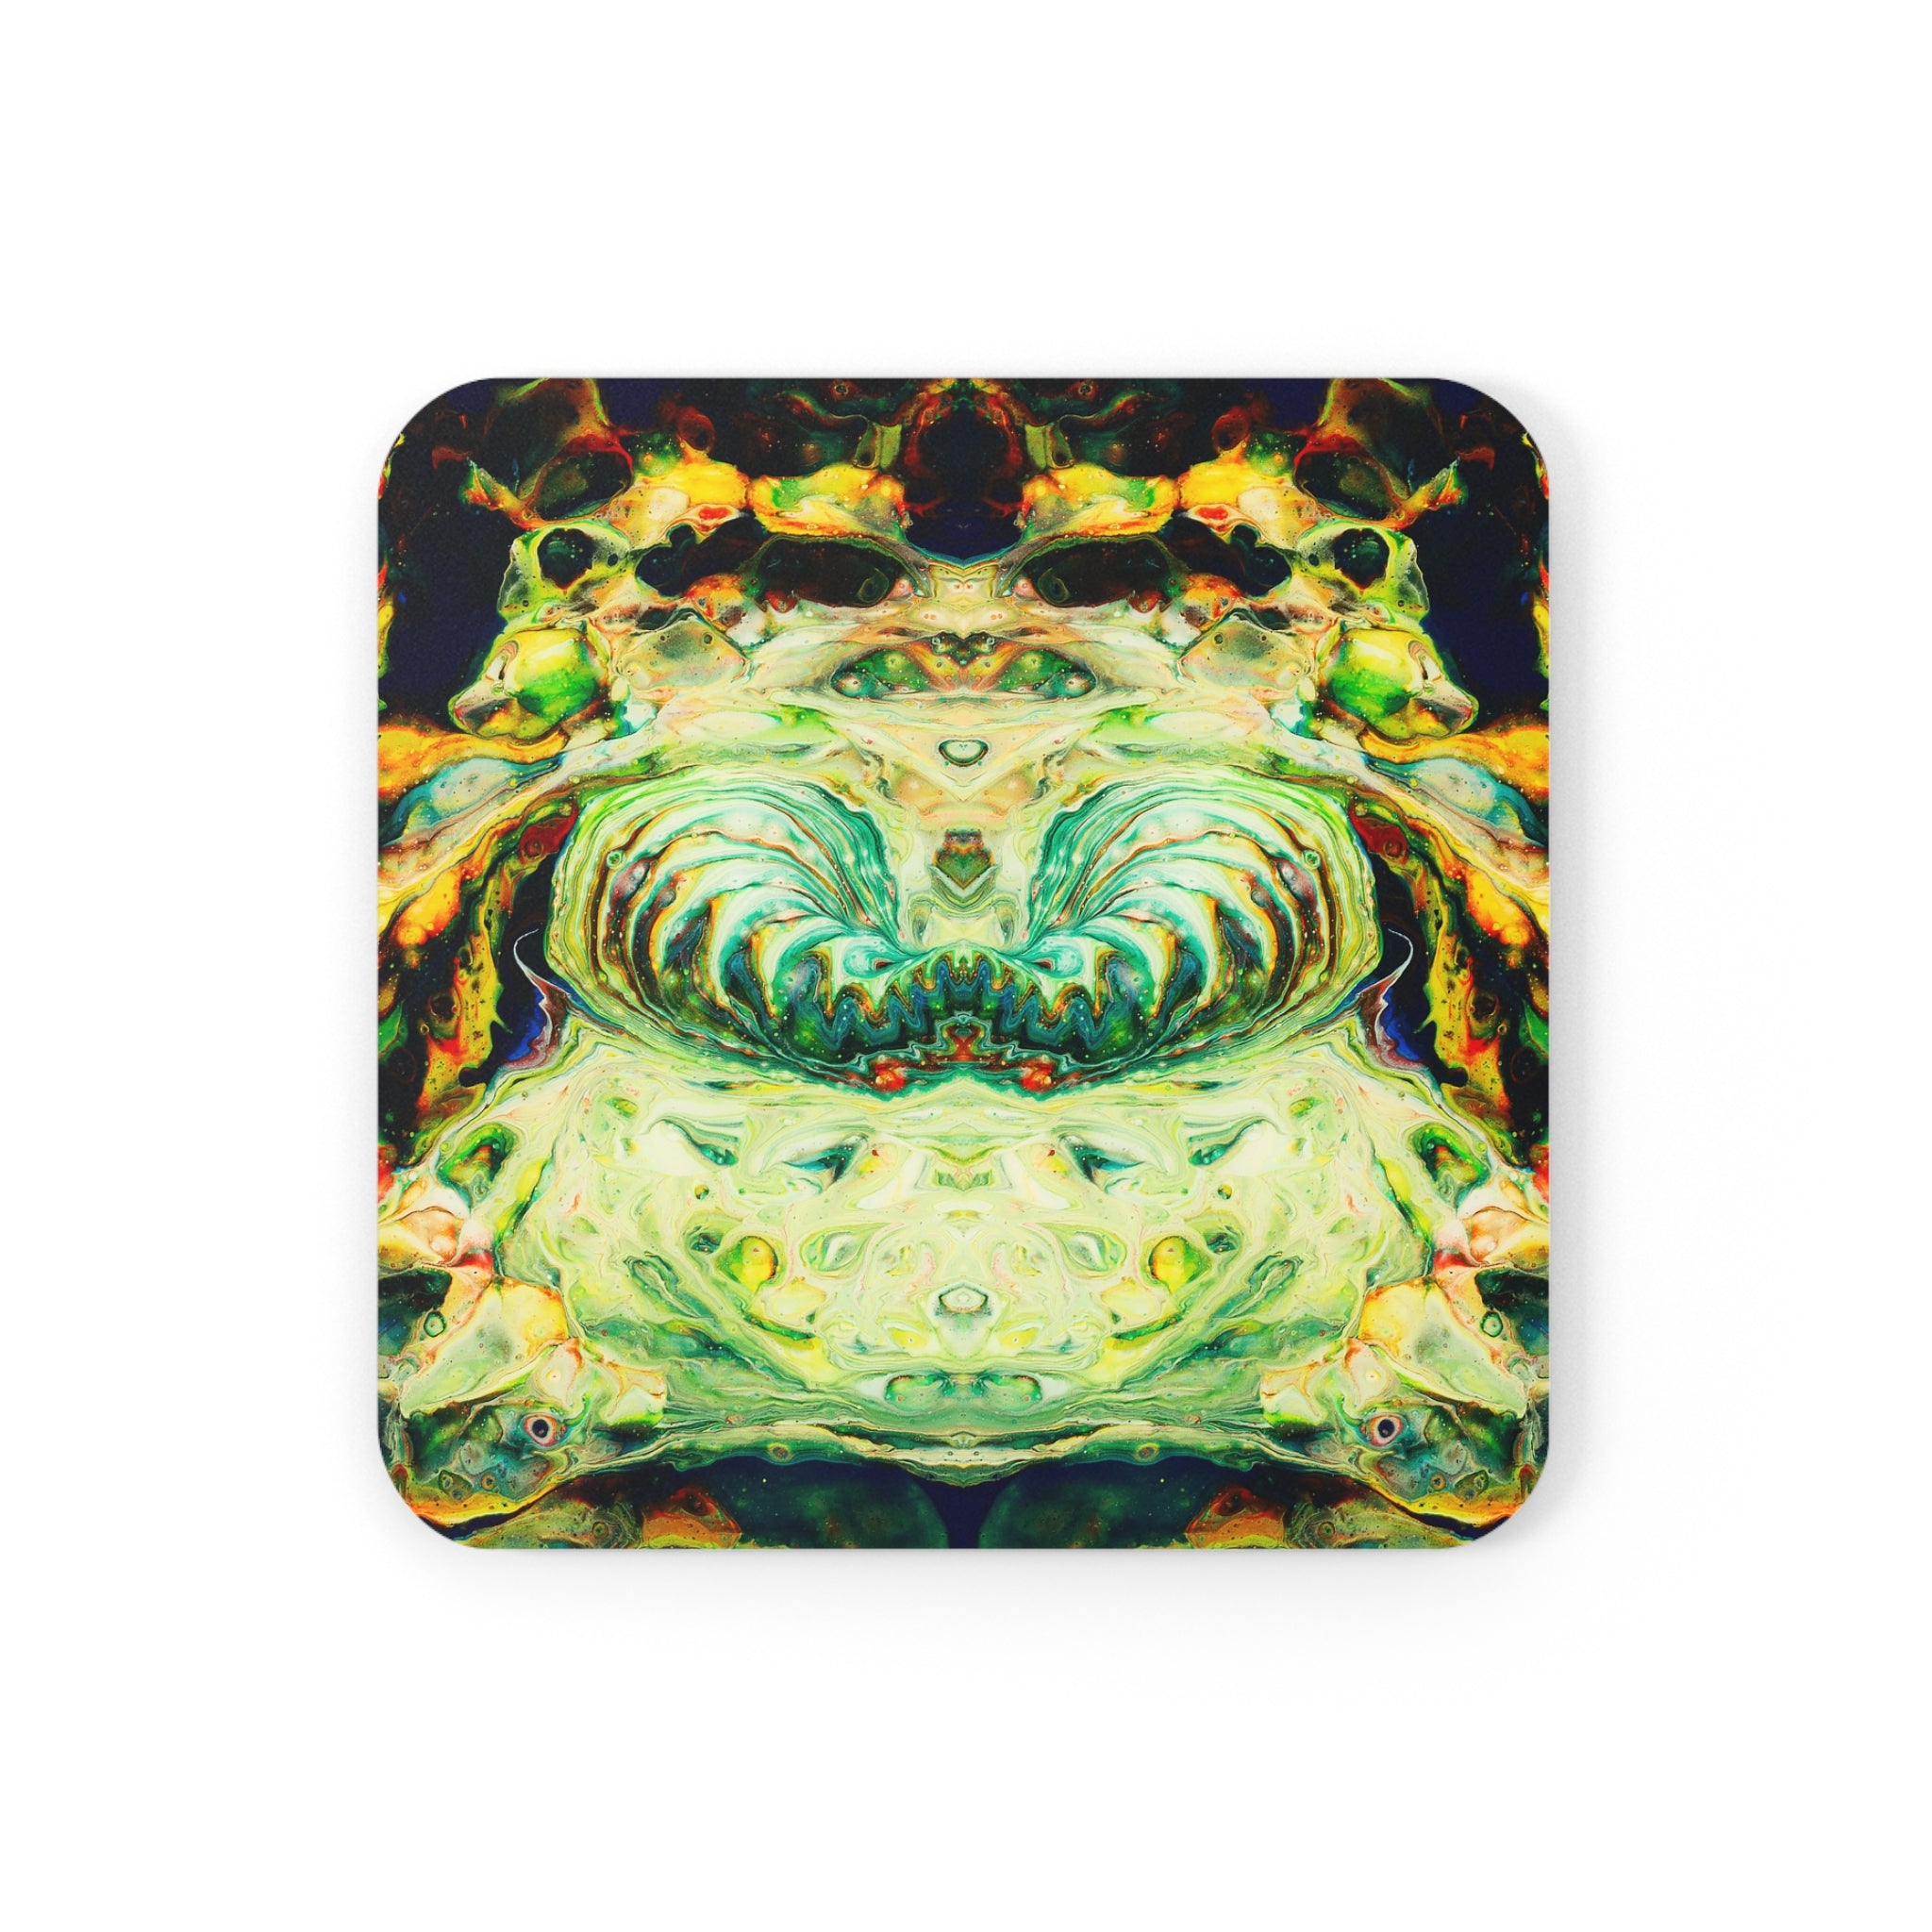 Cameron Creations - Galactial Horse - Stylish Coffee Coaster - Square Front